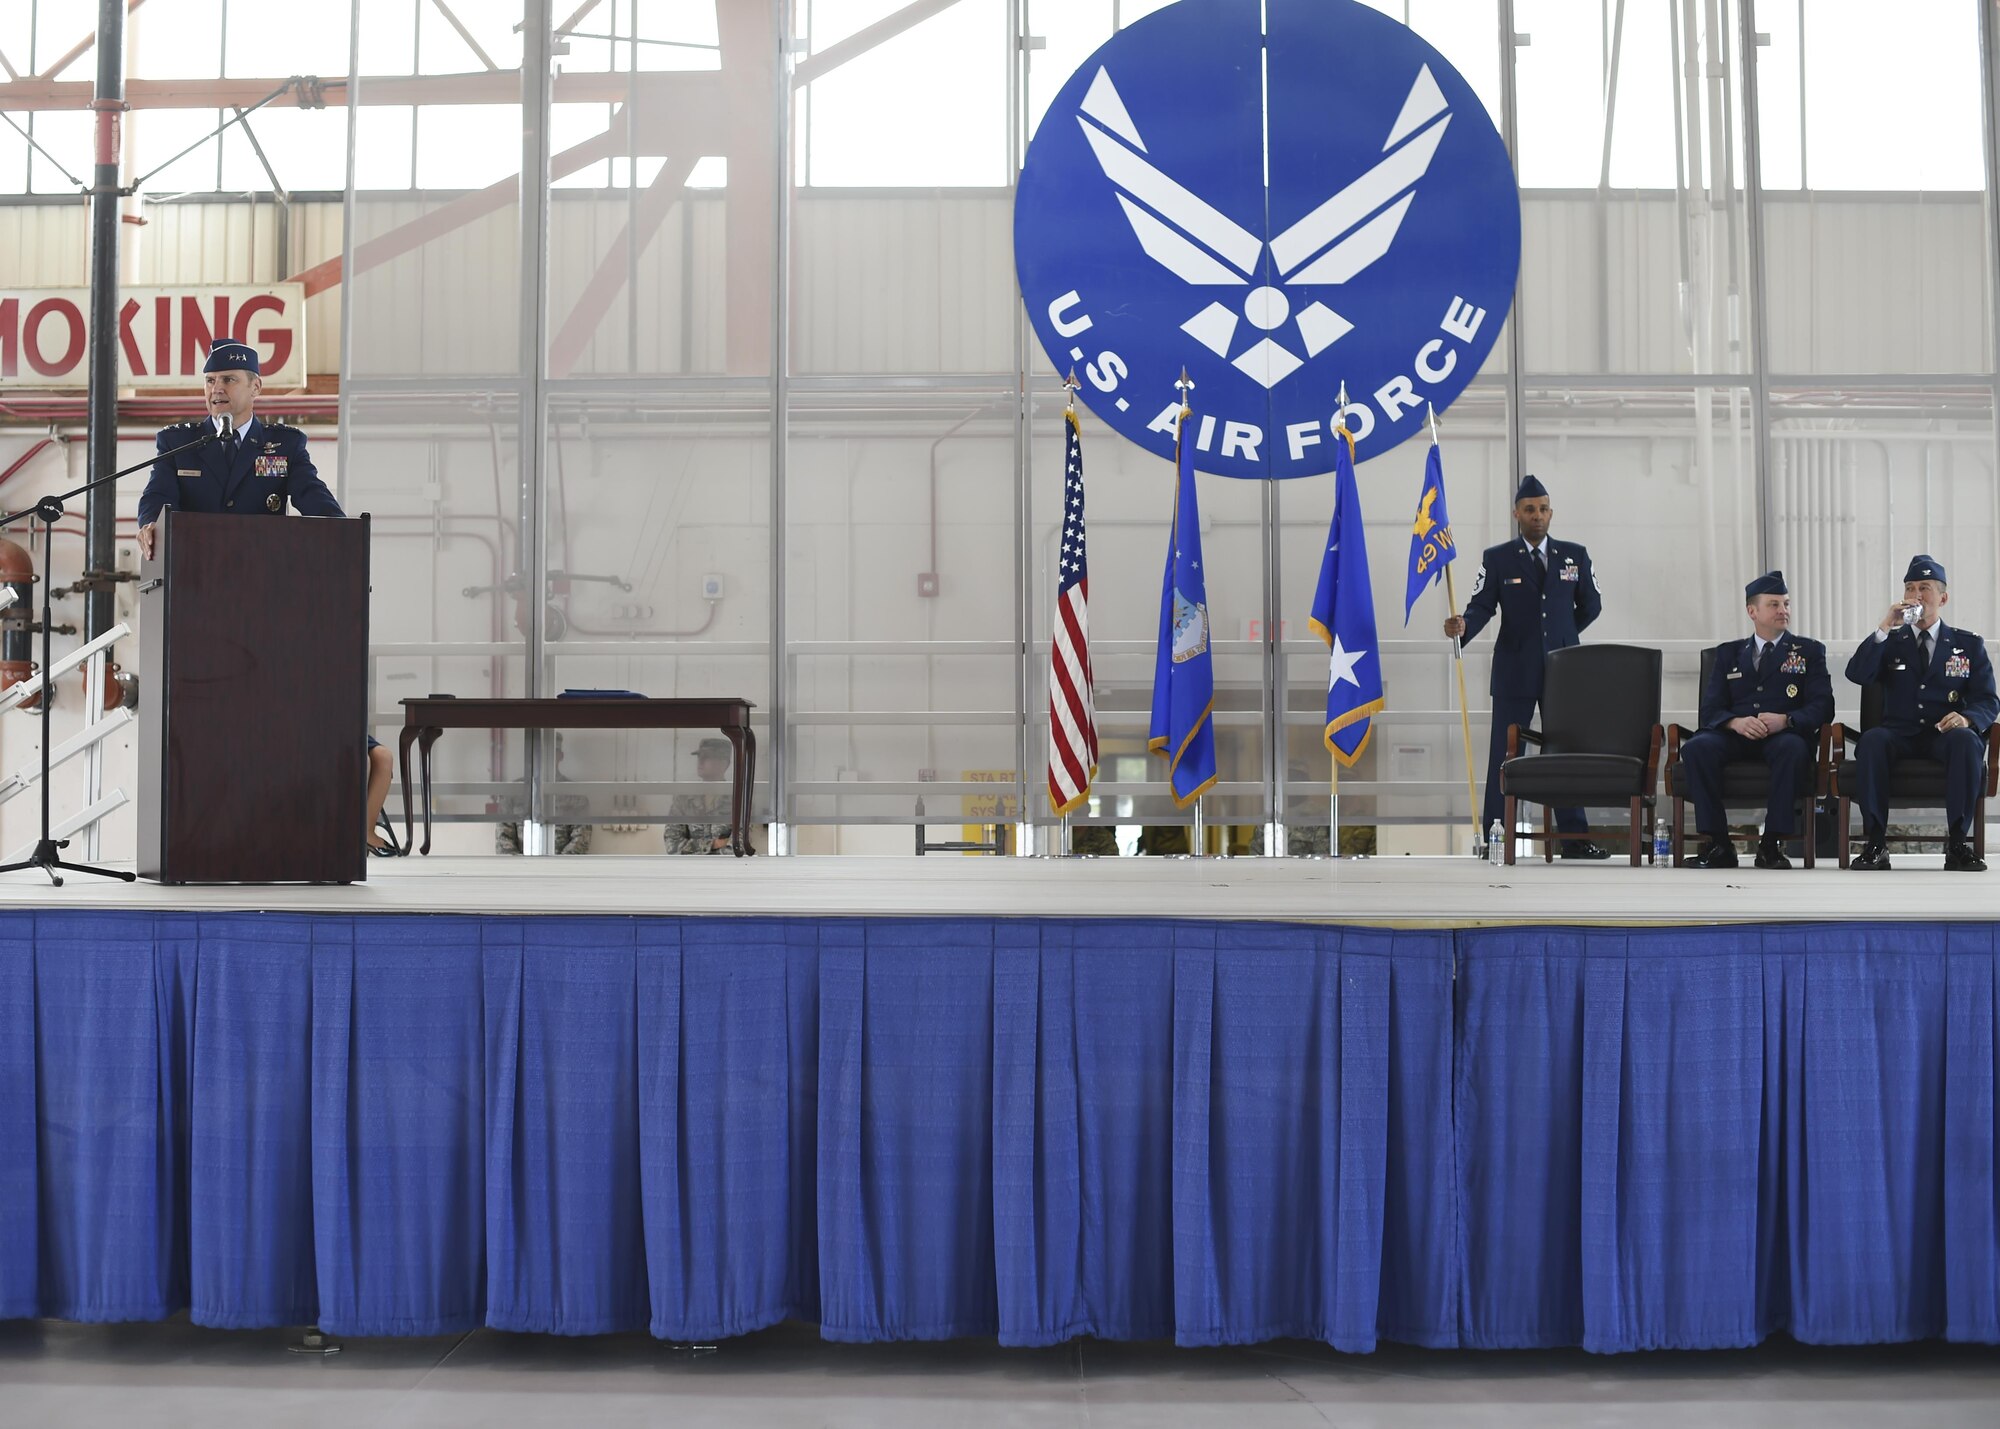 Lt. Gen. Mark Nowland the 12th Air Force commander delivers opening remarks before officiating the change-of-command ceremony July 15 at Hangar 500 at Holloman Air Force Base N.M. Col. Houston Cantwell assumed command of the 49th Wing and Holloman Air Force Base from the previous commander, Col. Robert Kiebler. As commander of the 49th Wing, Cantwell will lead Holloman’s mission to provide combat-ready Airmen, train MQ-1 Predator and MQ-9 Reaper pilots and sensor operators, and hosts the 54th Fighter Group's F-16 Fighting Falcon pilot training mission, the 96th Test Group's high-speed test track mission and the German Air Force Flying Training Center. (U.S. Air Force Photo by: Staff Sgt. Stacy Moless)